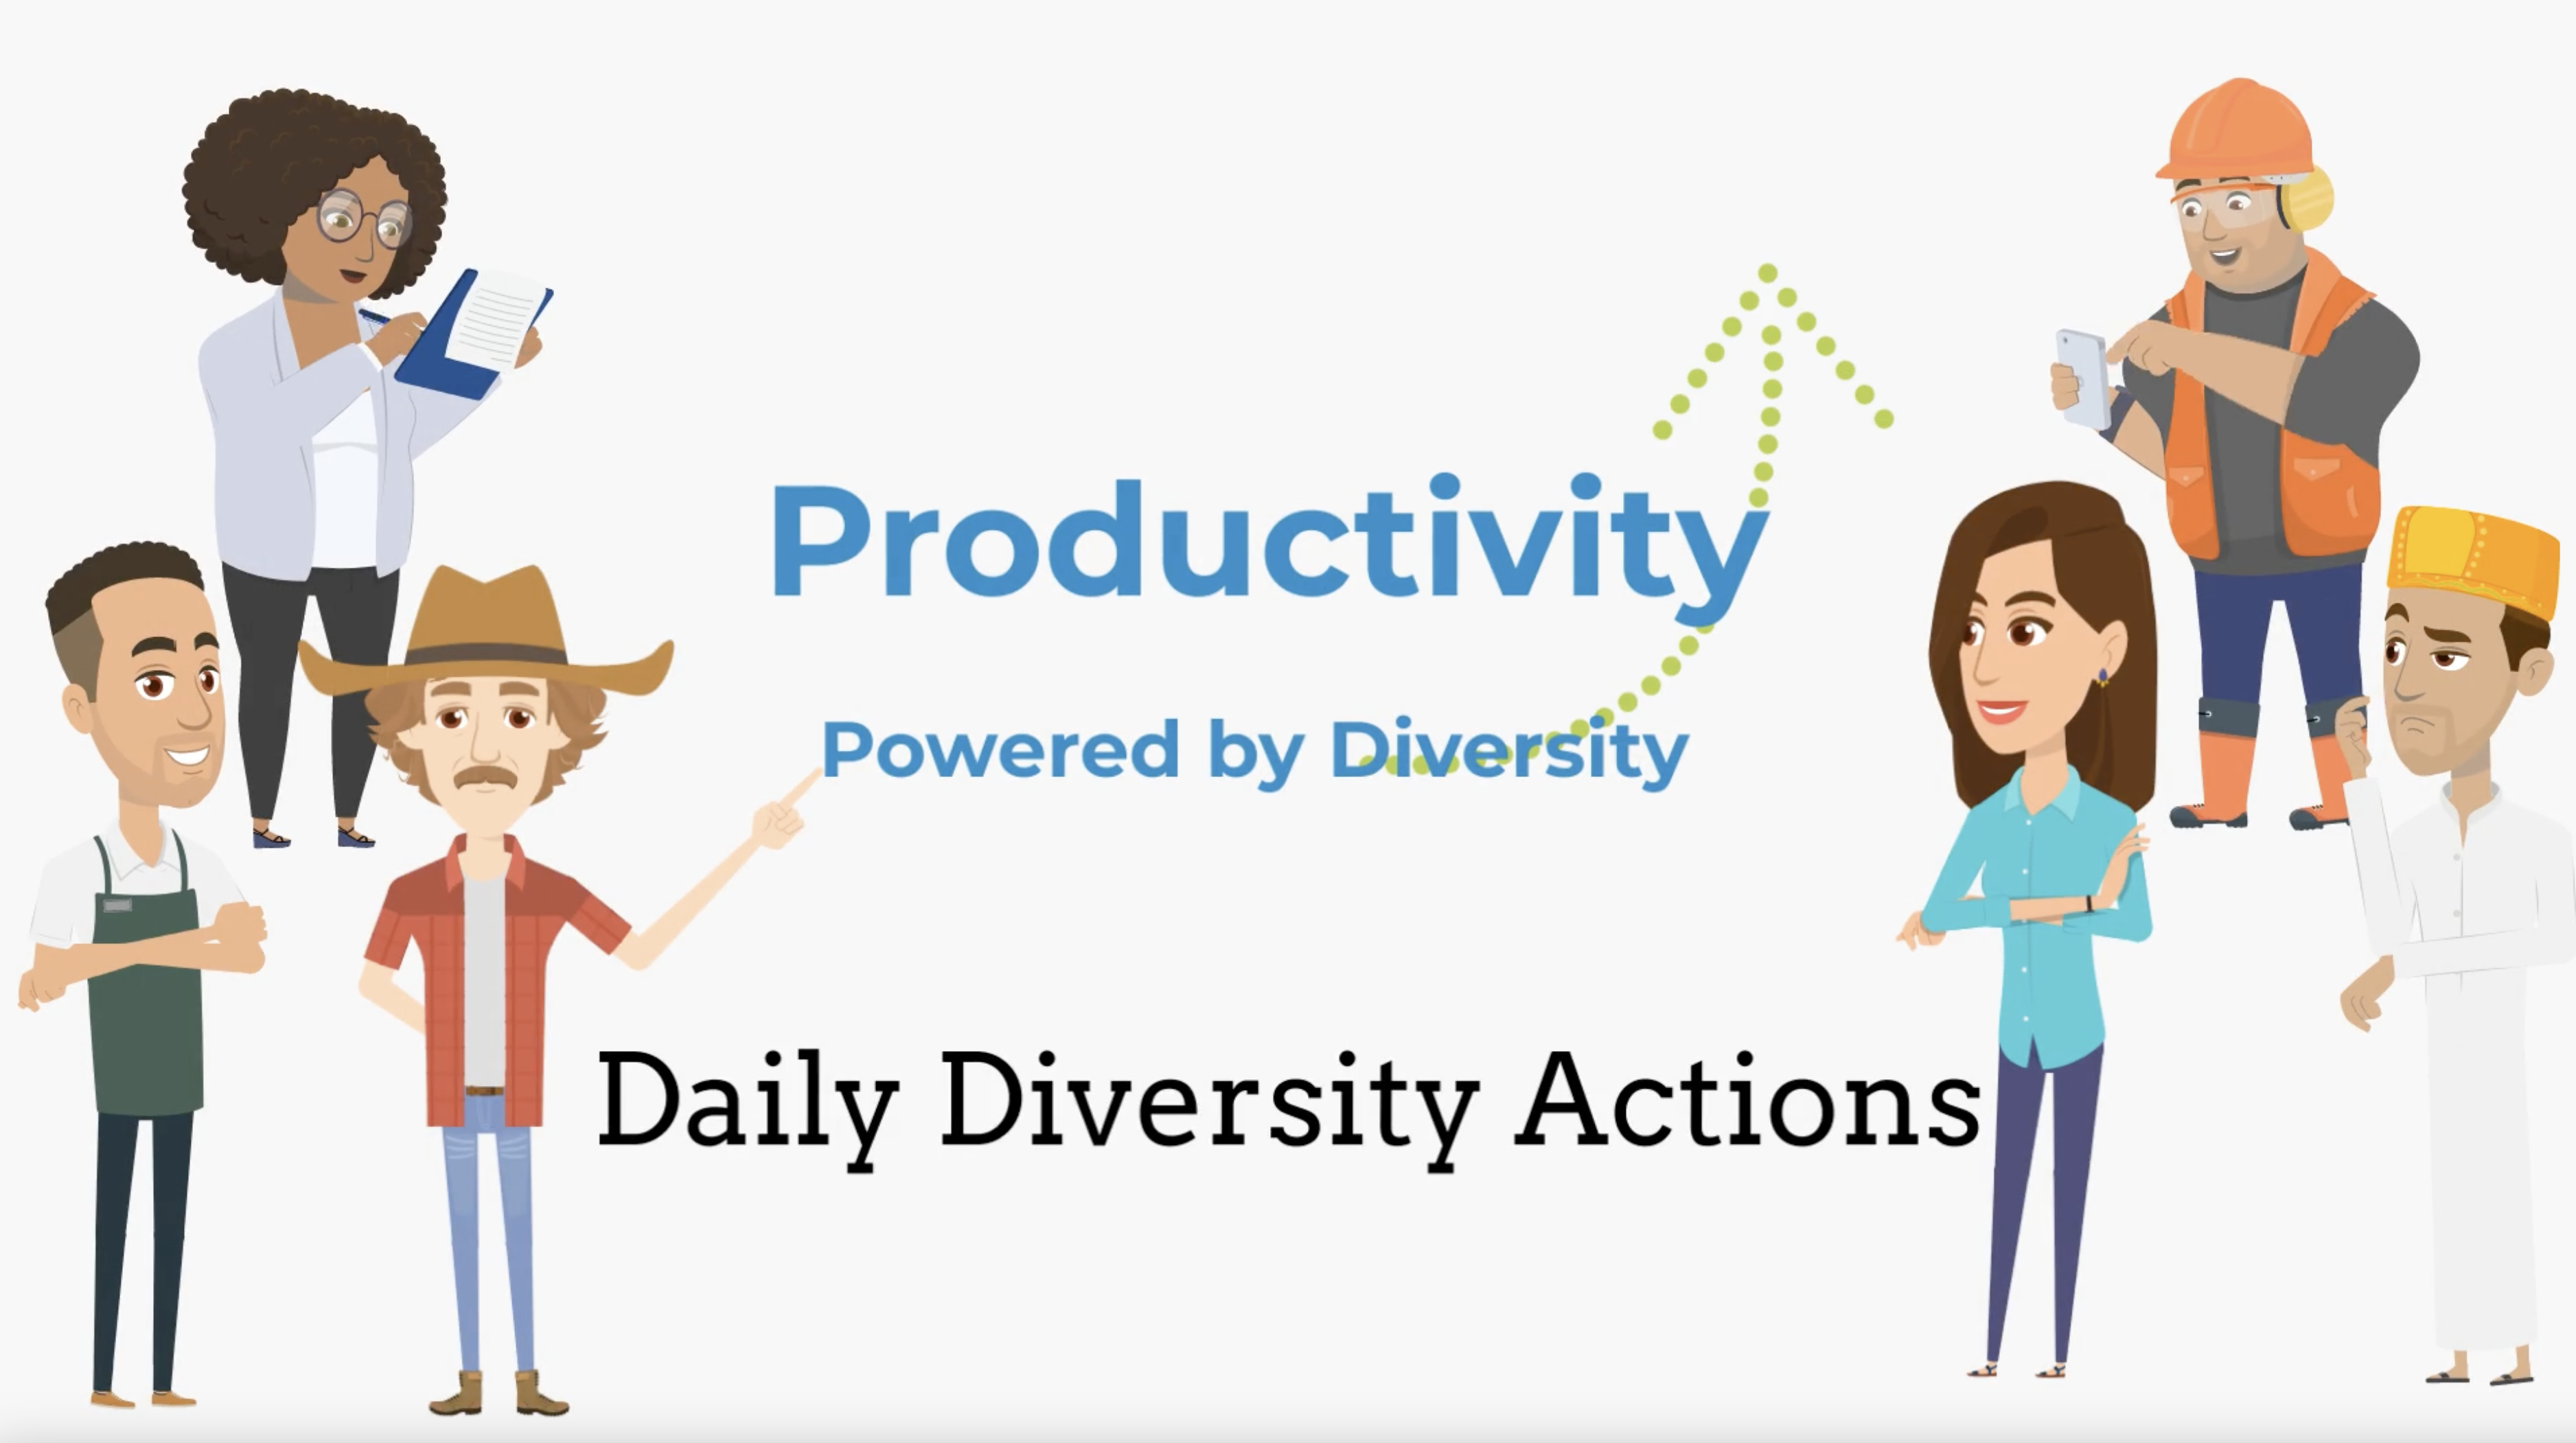 09.00 Daily Diversity Action